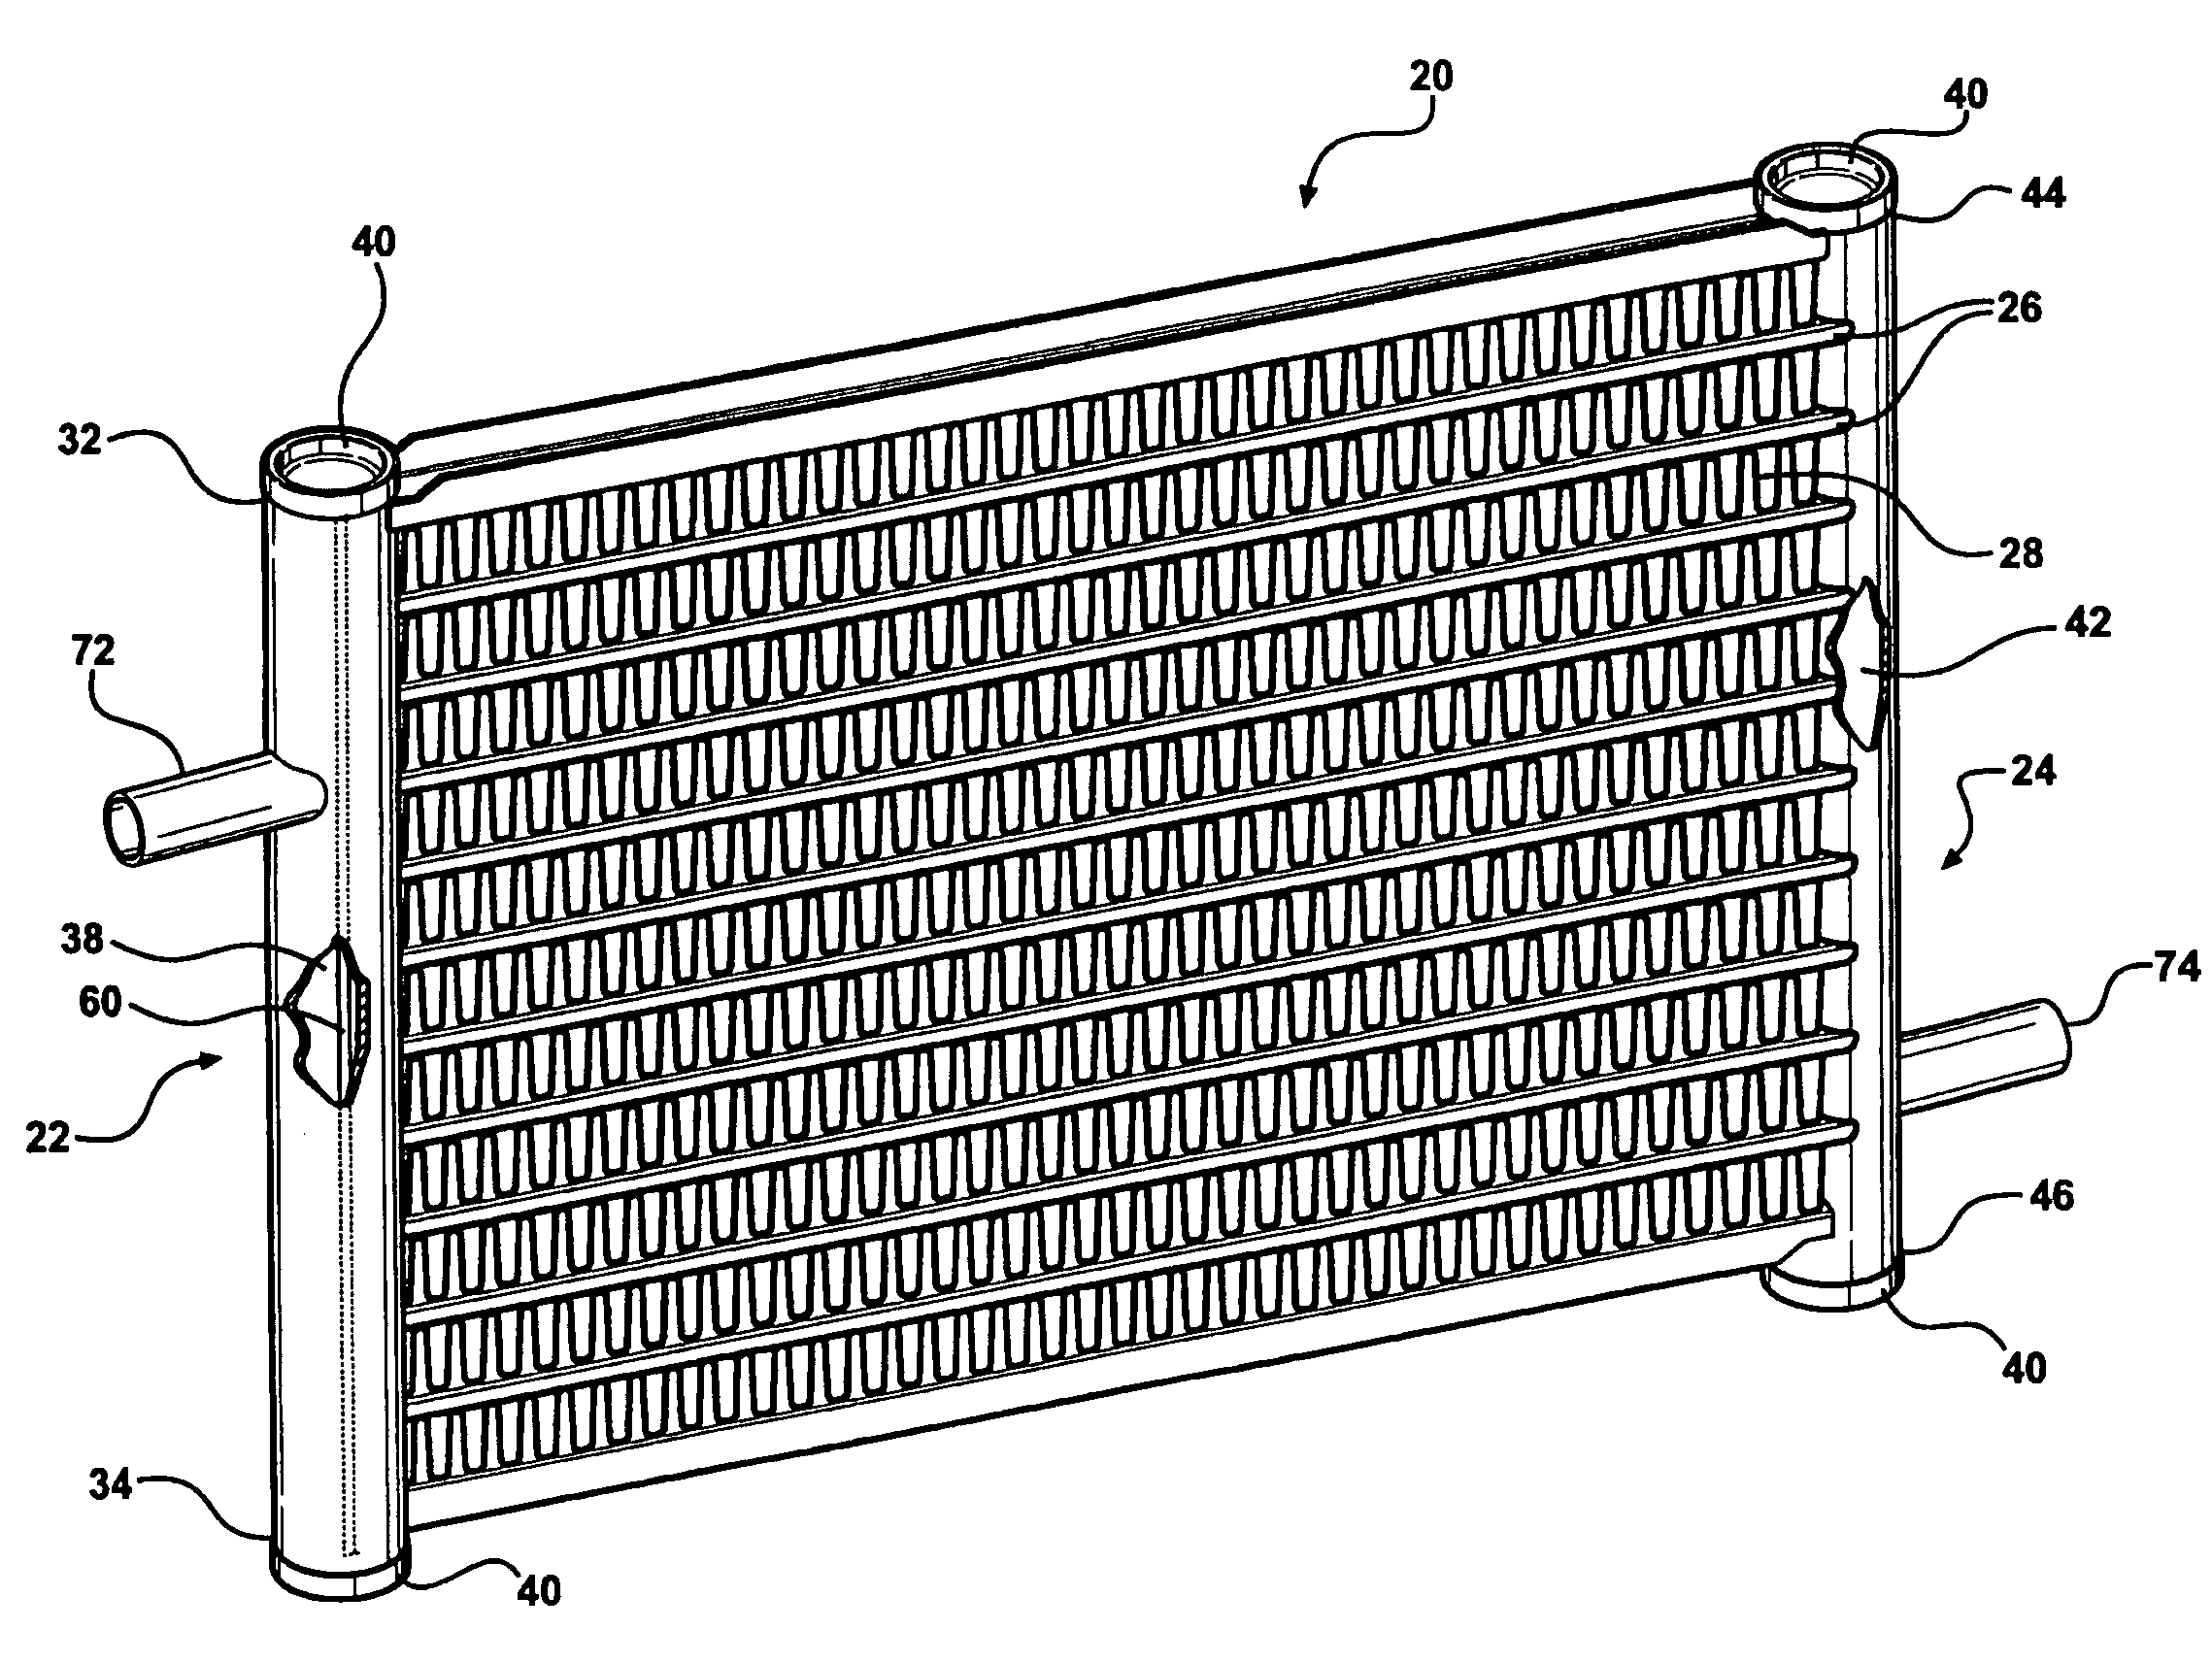 Heat exchanger assembly